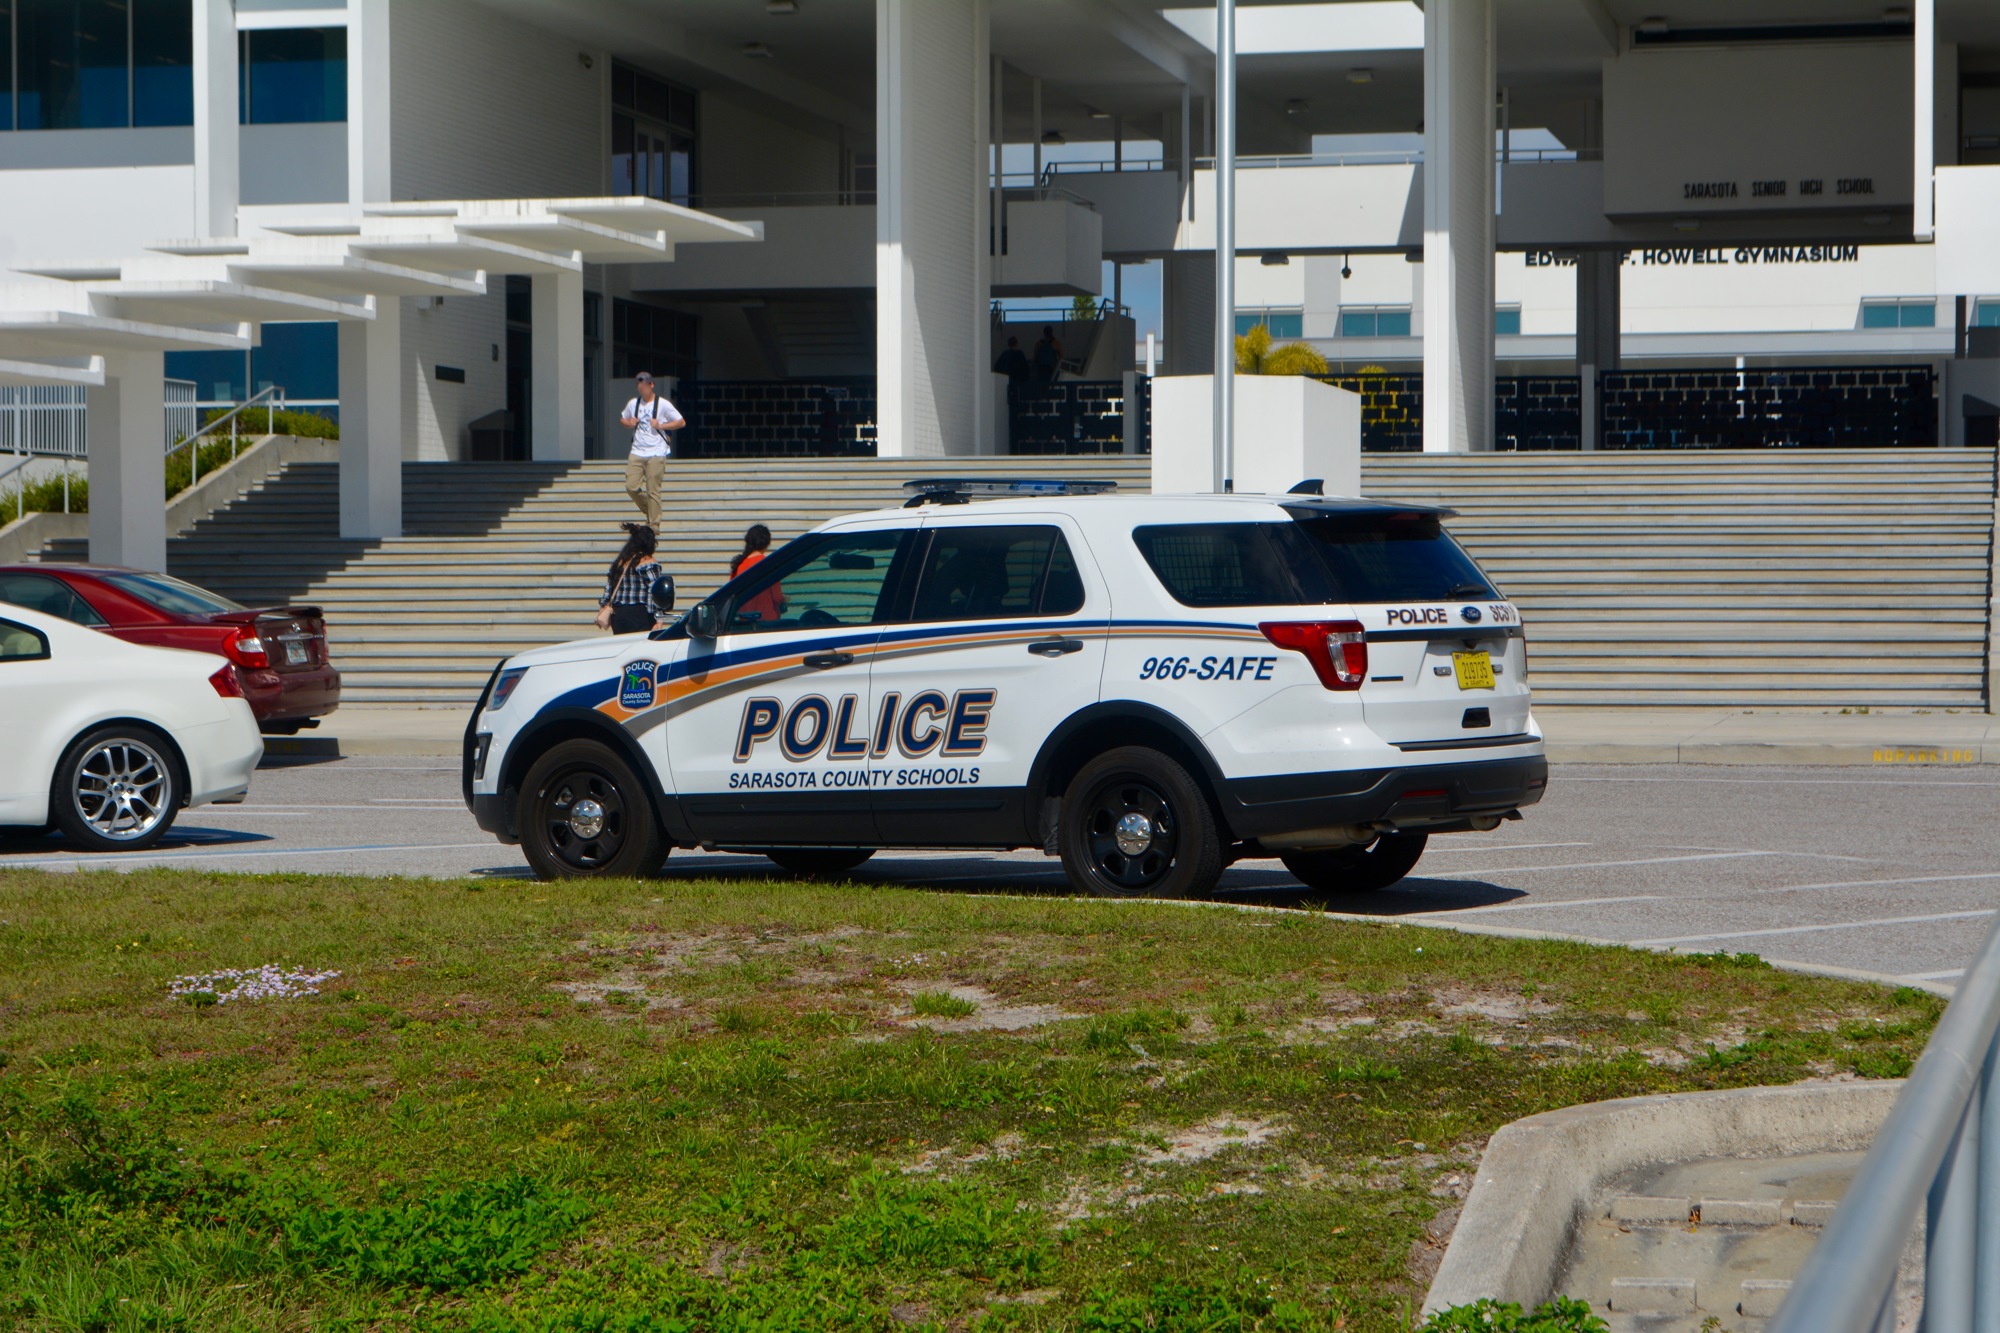 A Sarasota County Schools Police Department vehicle sits at the front of Sarasota High School's campus.